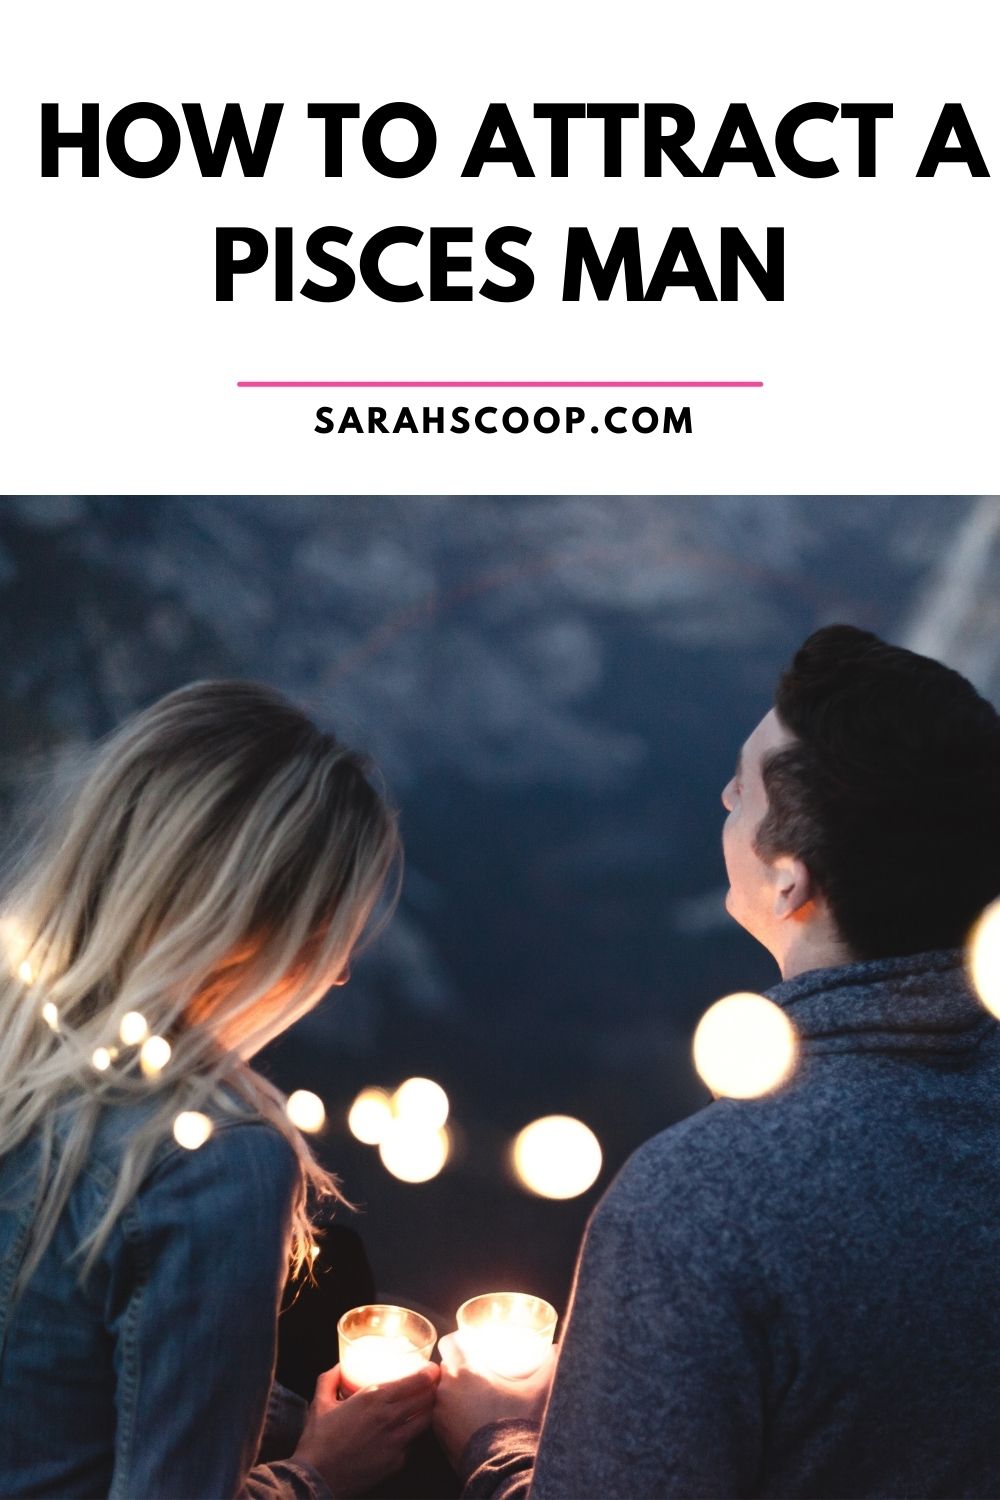 How To Attract A Pisces Man 25 Ways Sarah Scoop